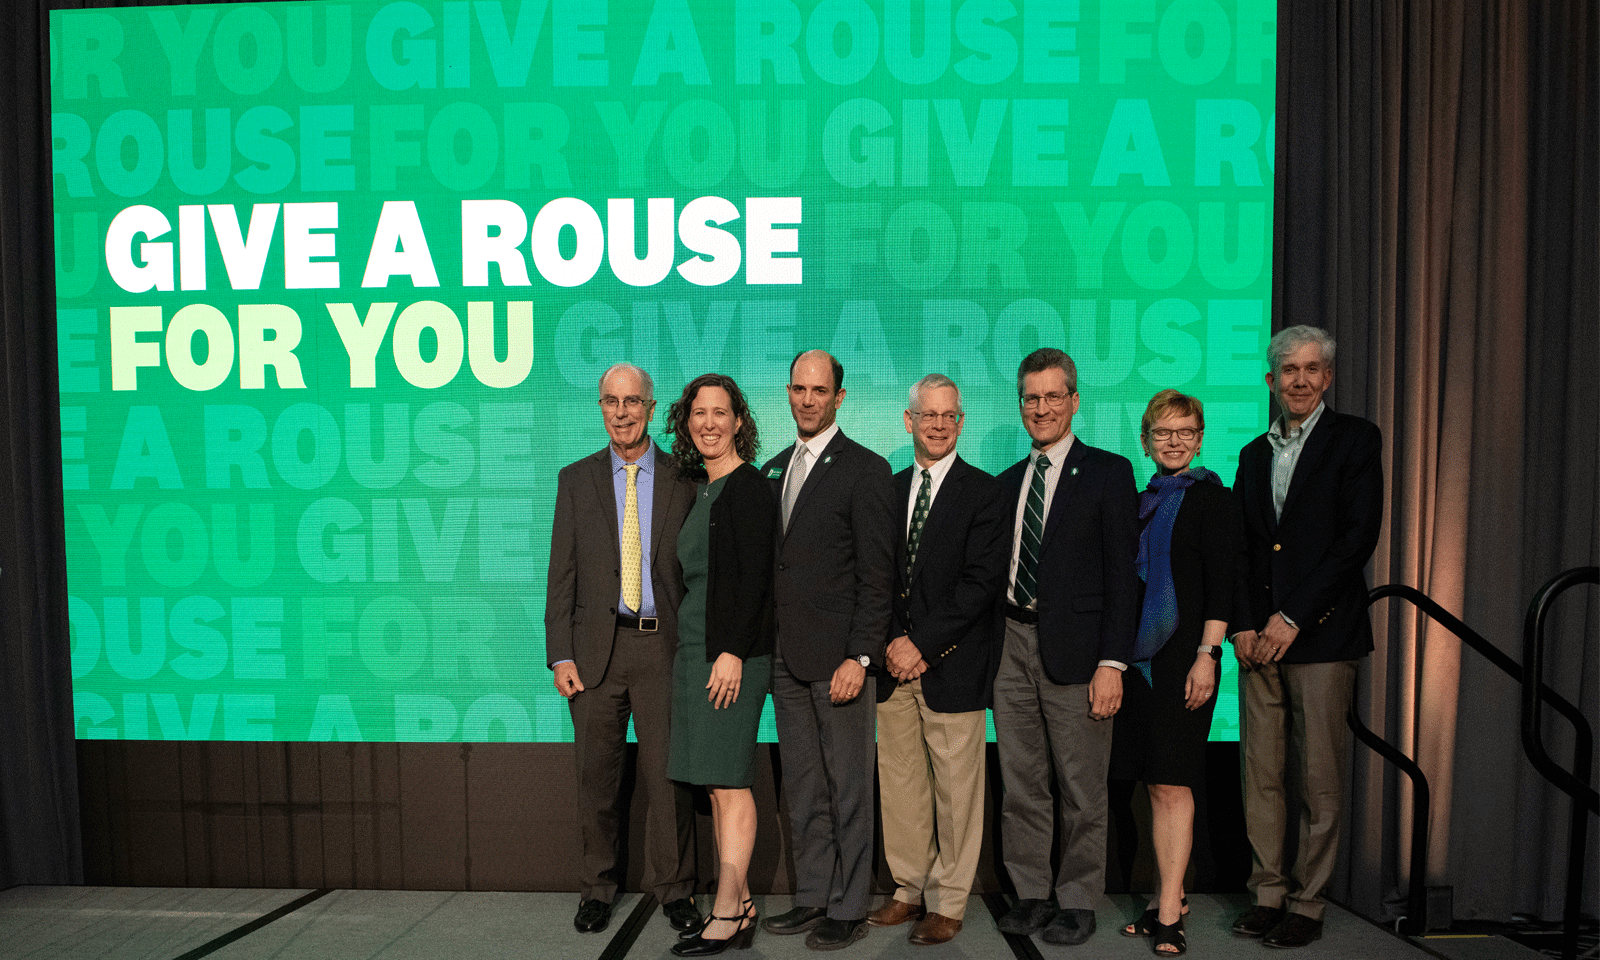 President Hanlon and other senior leaders onstage at the Give A Rouse Hanover event